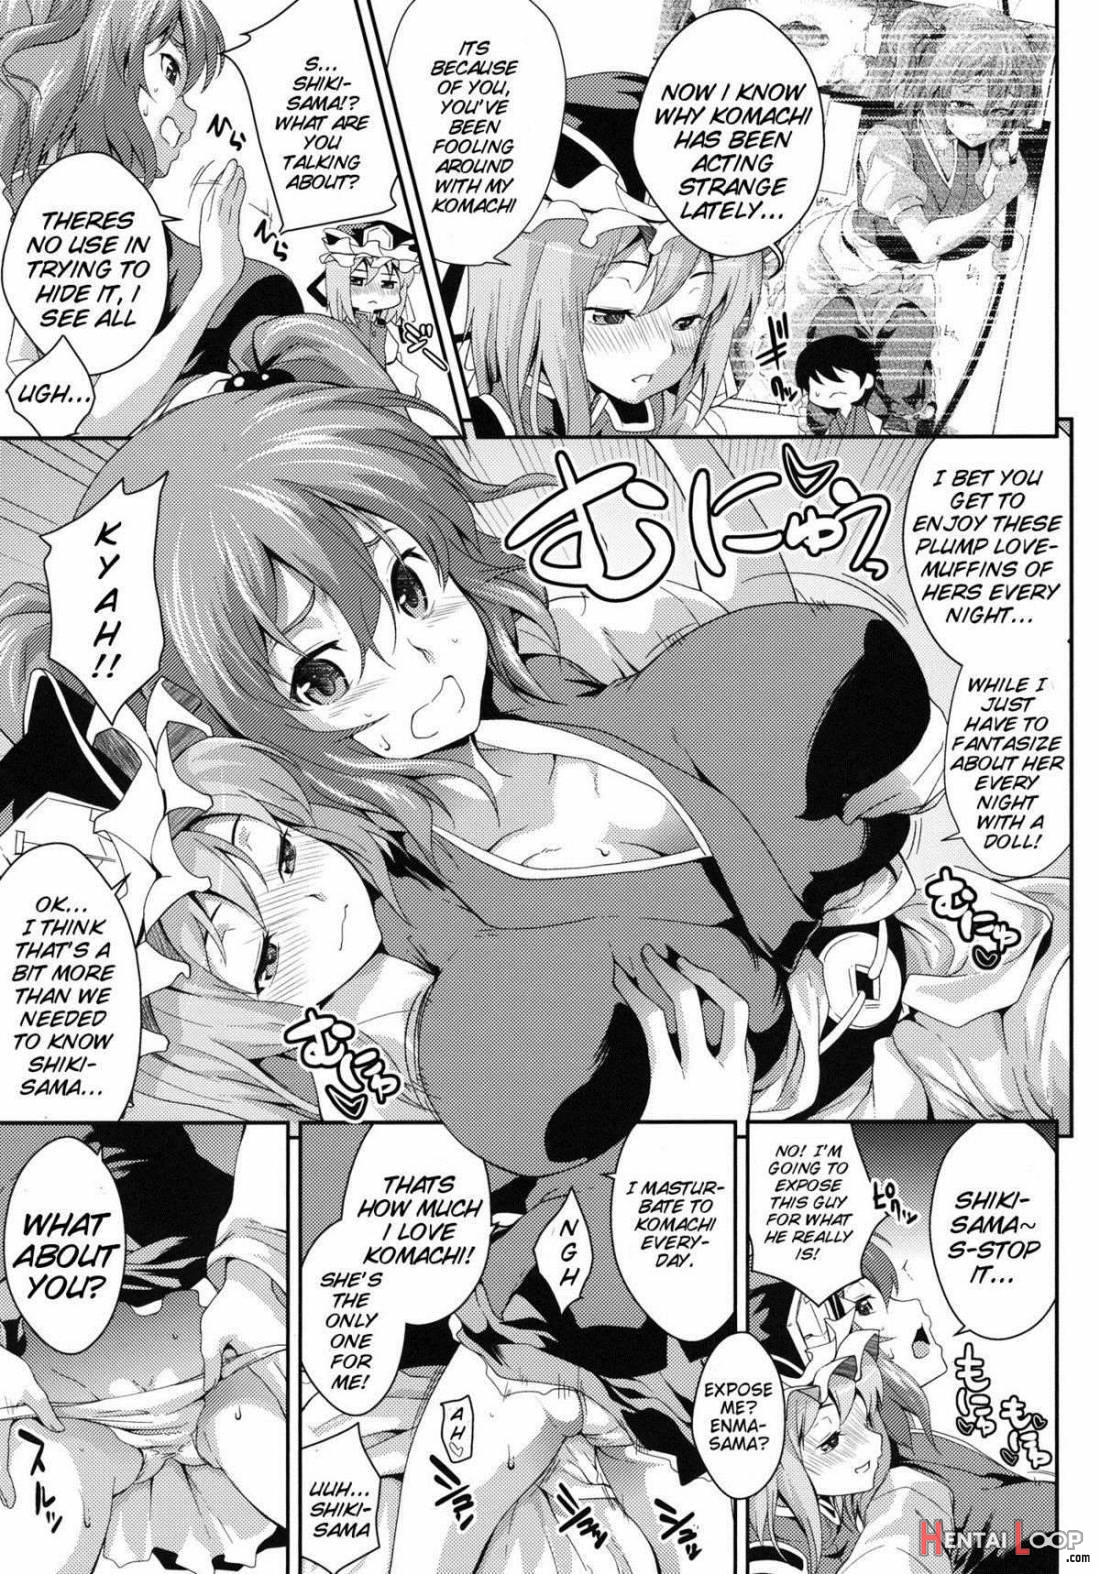 Together With Komachi 3 page 8